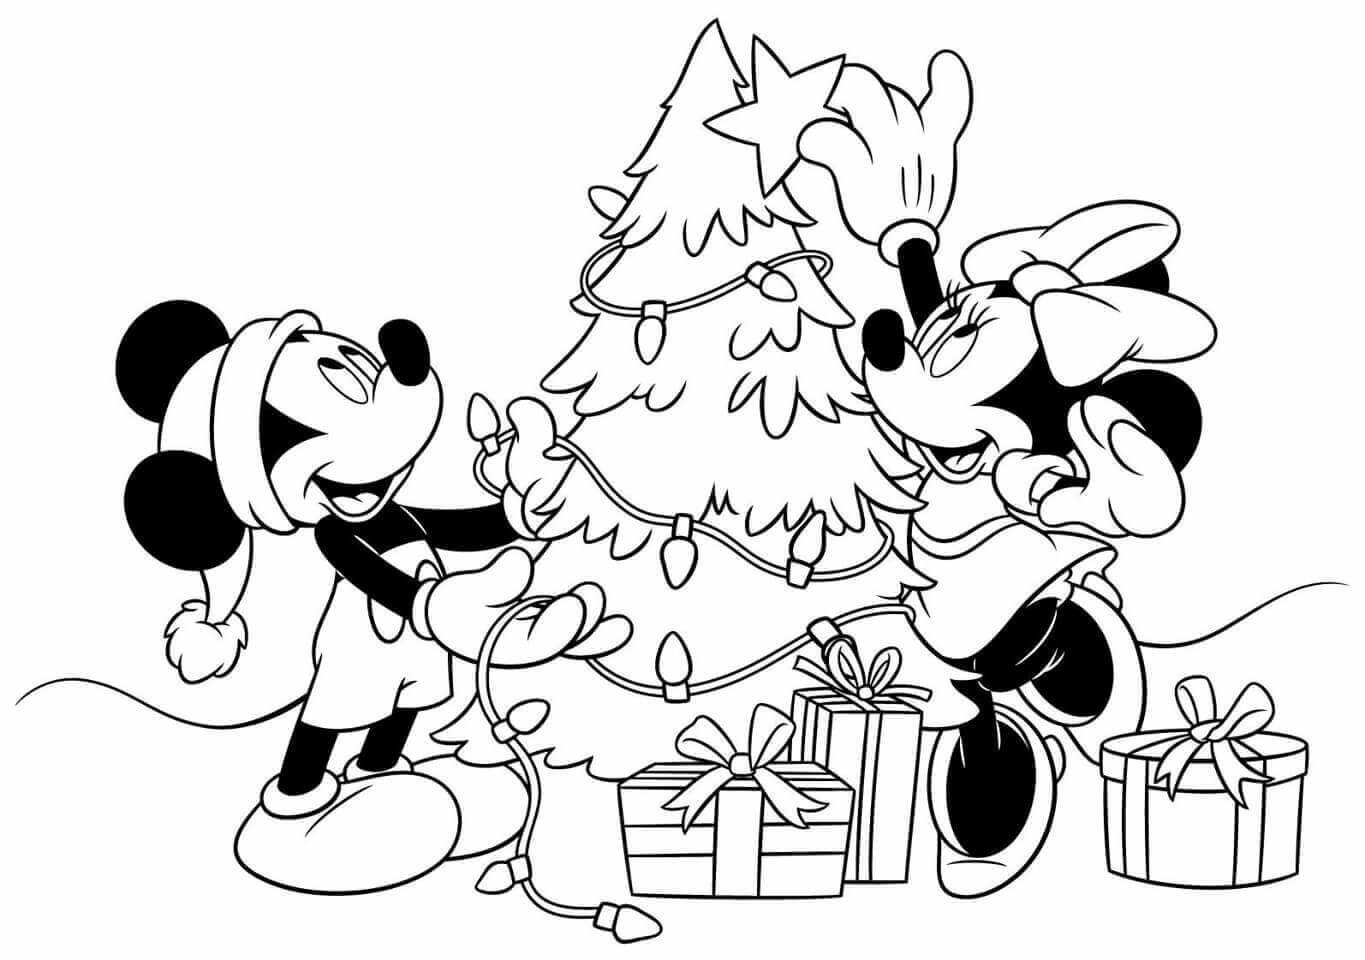 35-free-disney-christmas-coloring-pages-printable